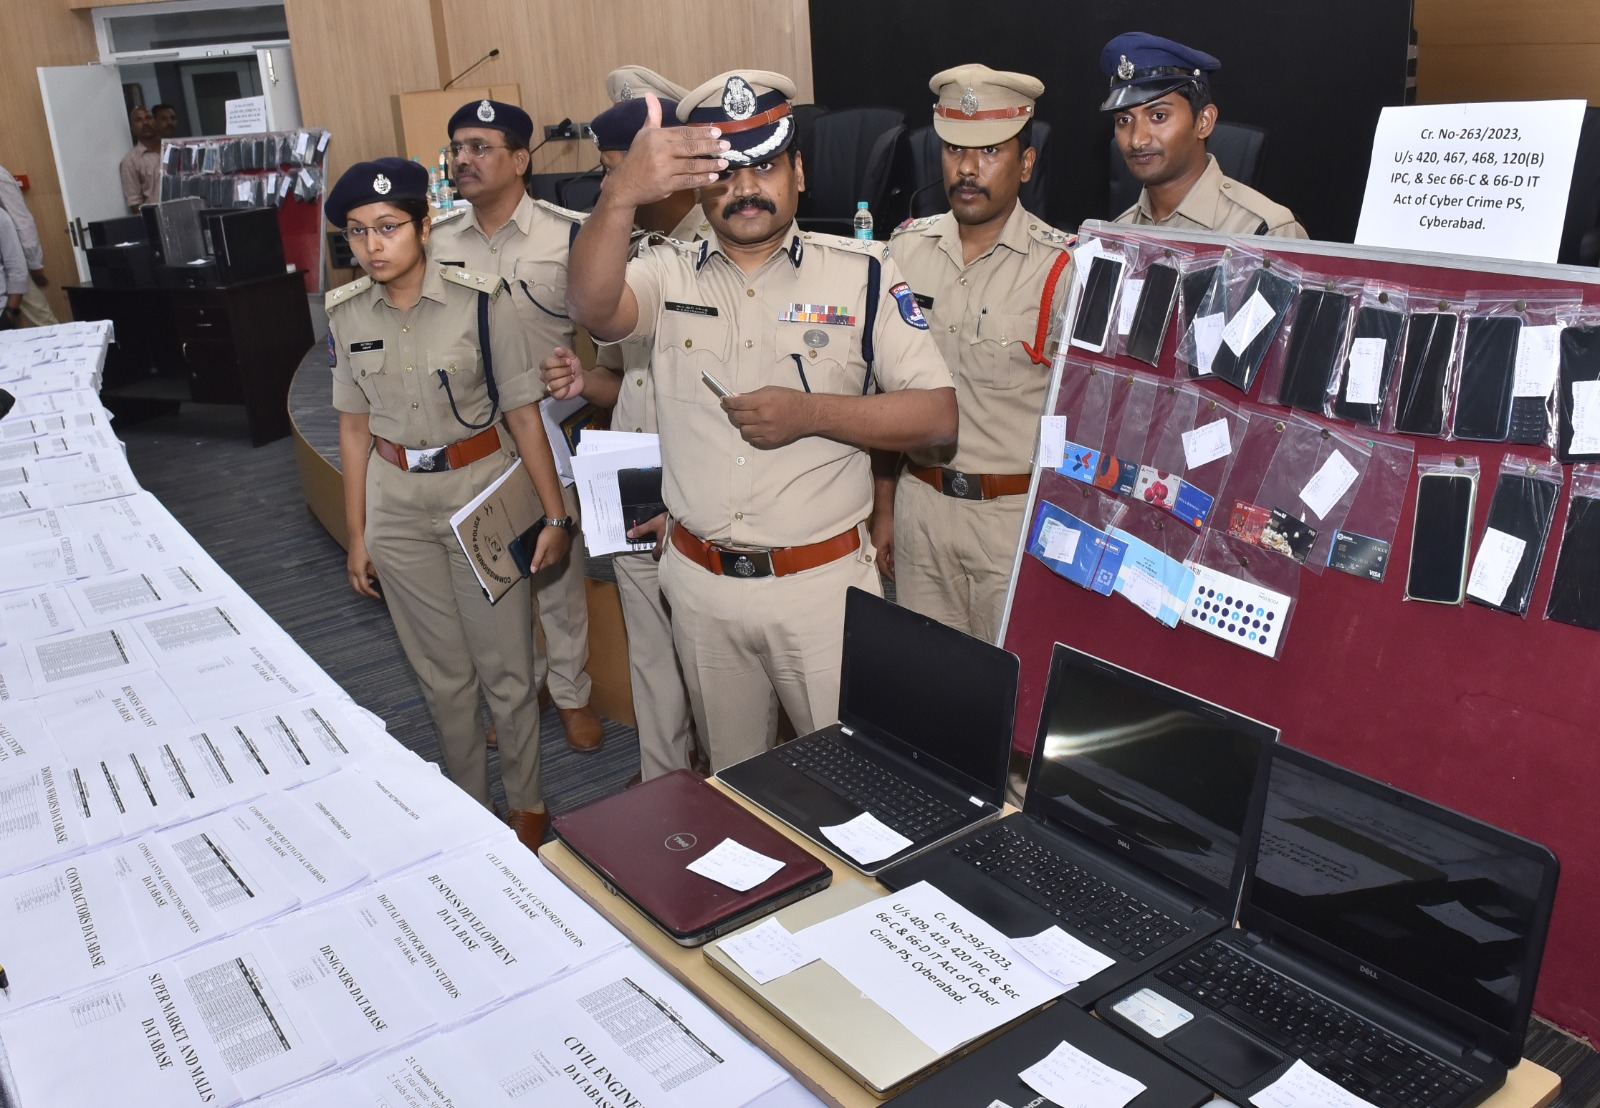 Personal data of 16.8 crore Indians up for sale, 7 nabbed